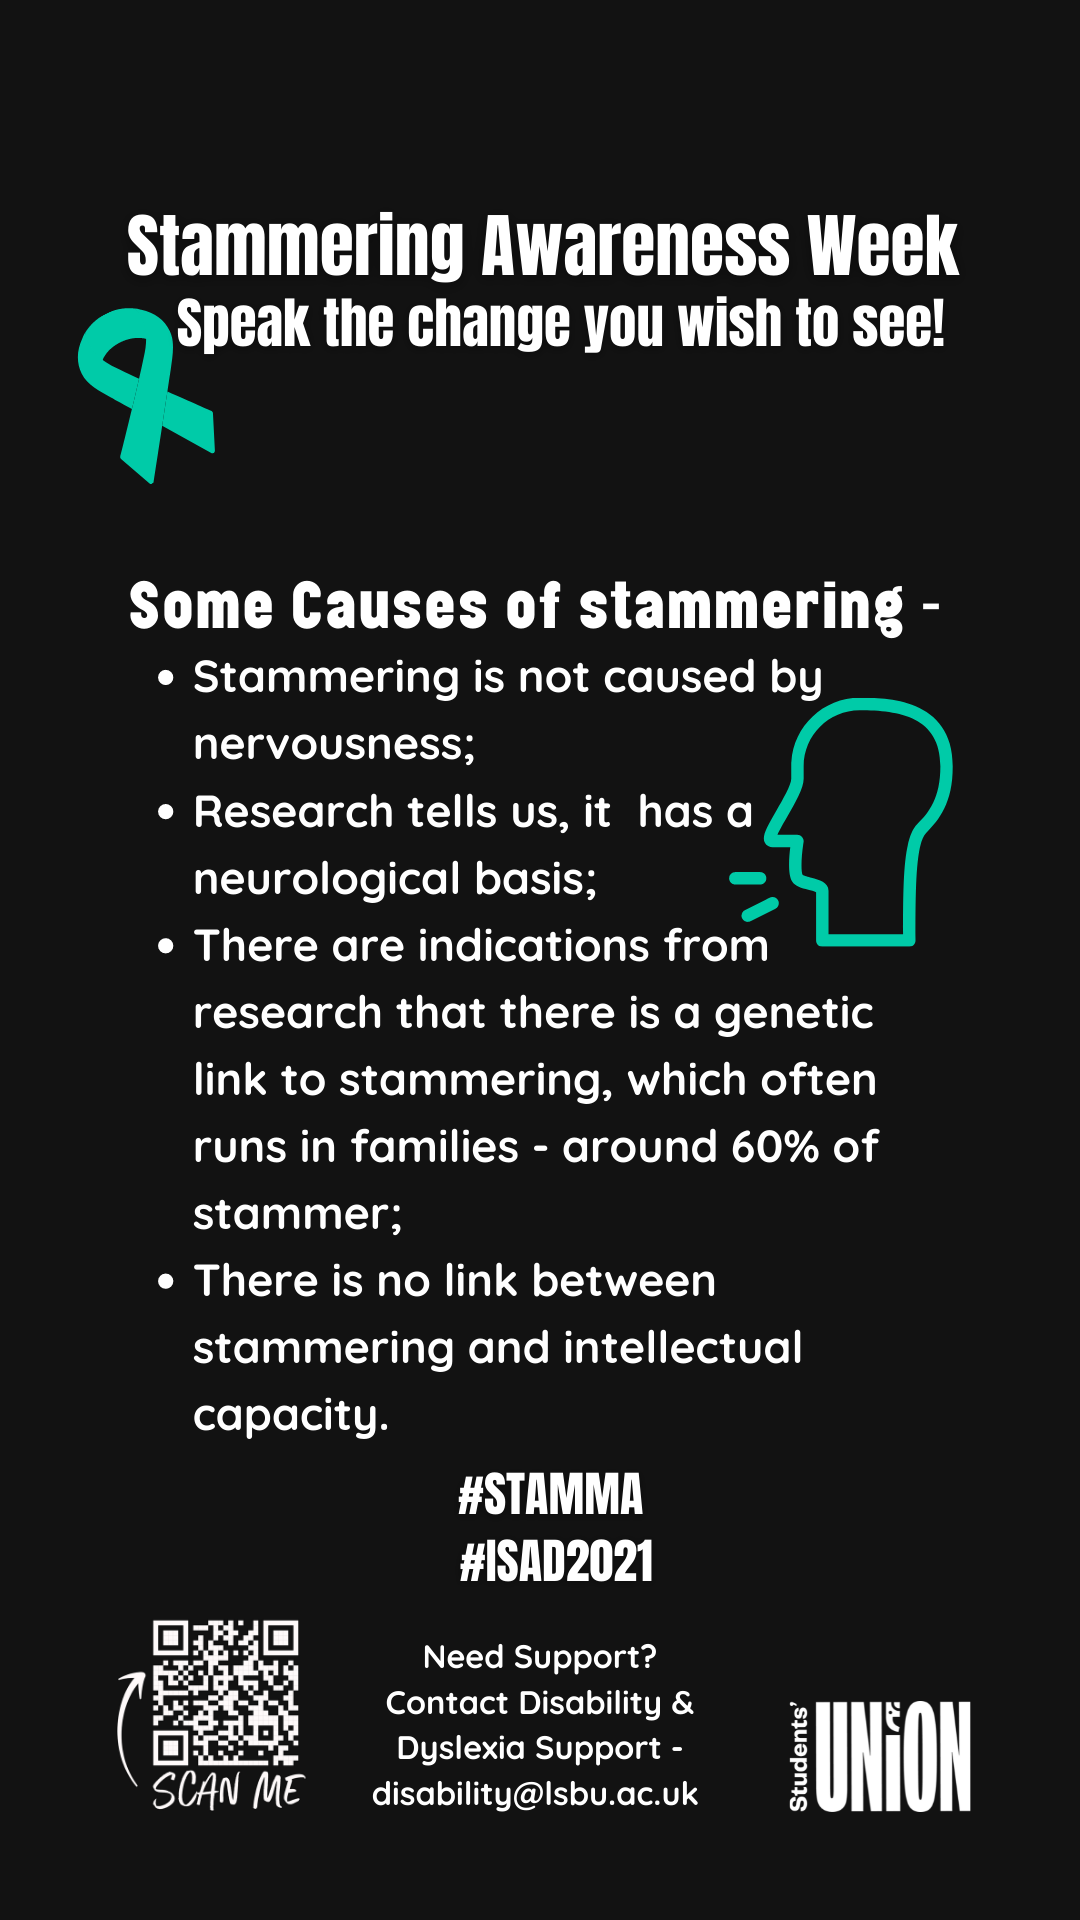 Causes of Stammering poster: Stammering is not caused by nervousness. Research tells us, it has a neurological basis. There are indications from research that there is a genetic link to stammering, which often runs in families - around 60% of stammer. There is no link between stammering and intellectual capacity.